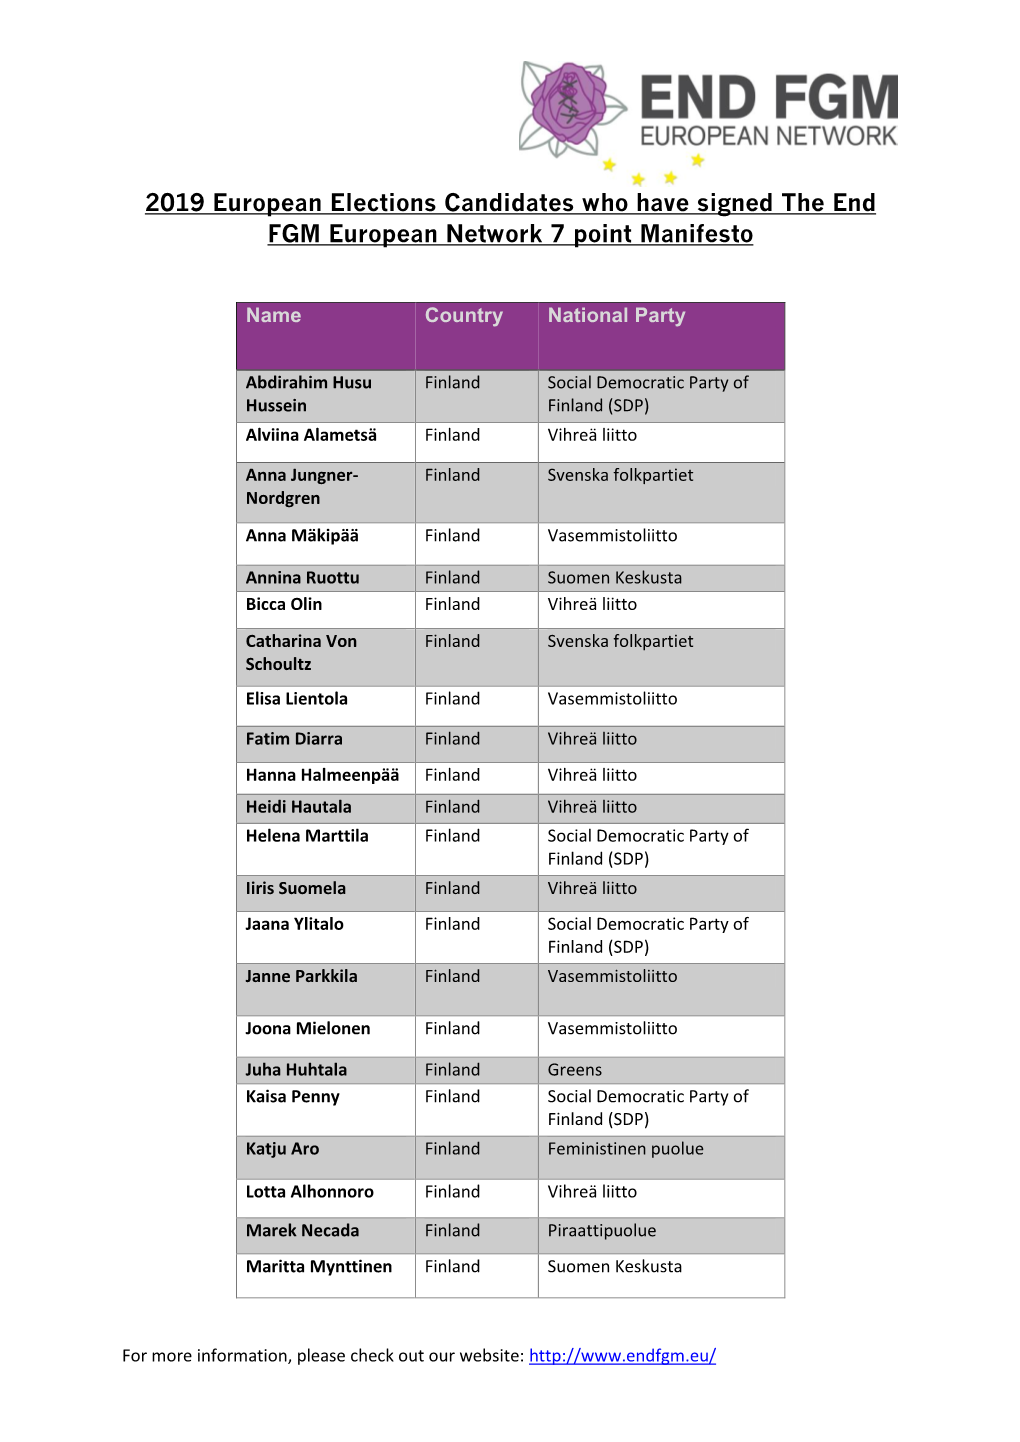 2019 European Elections Candidates Who Have Signed the End FGM European Network 7 Point Manifesto